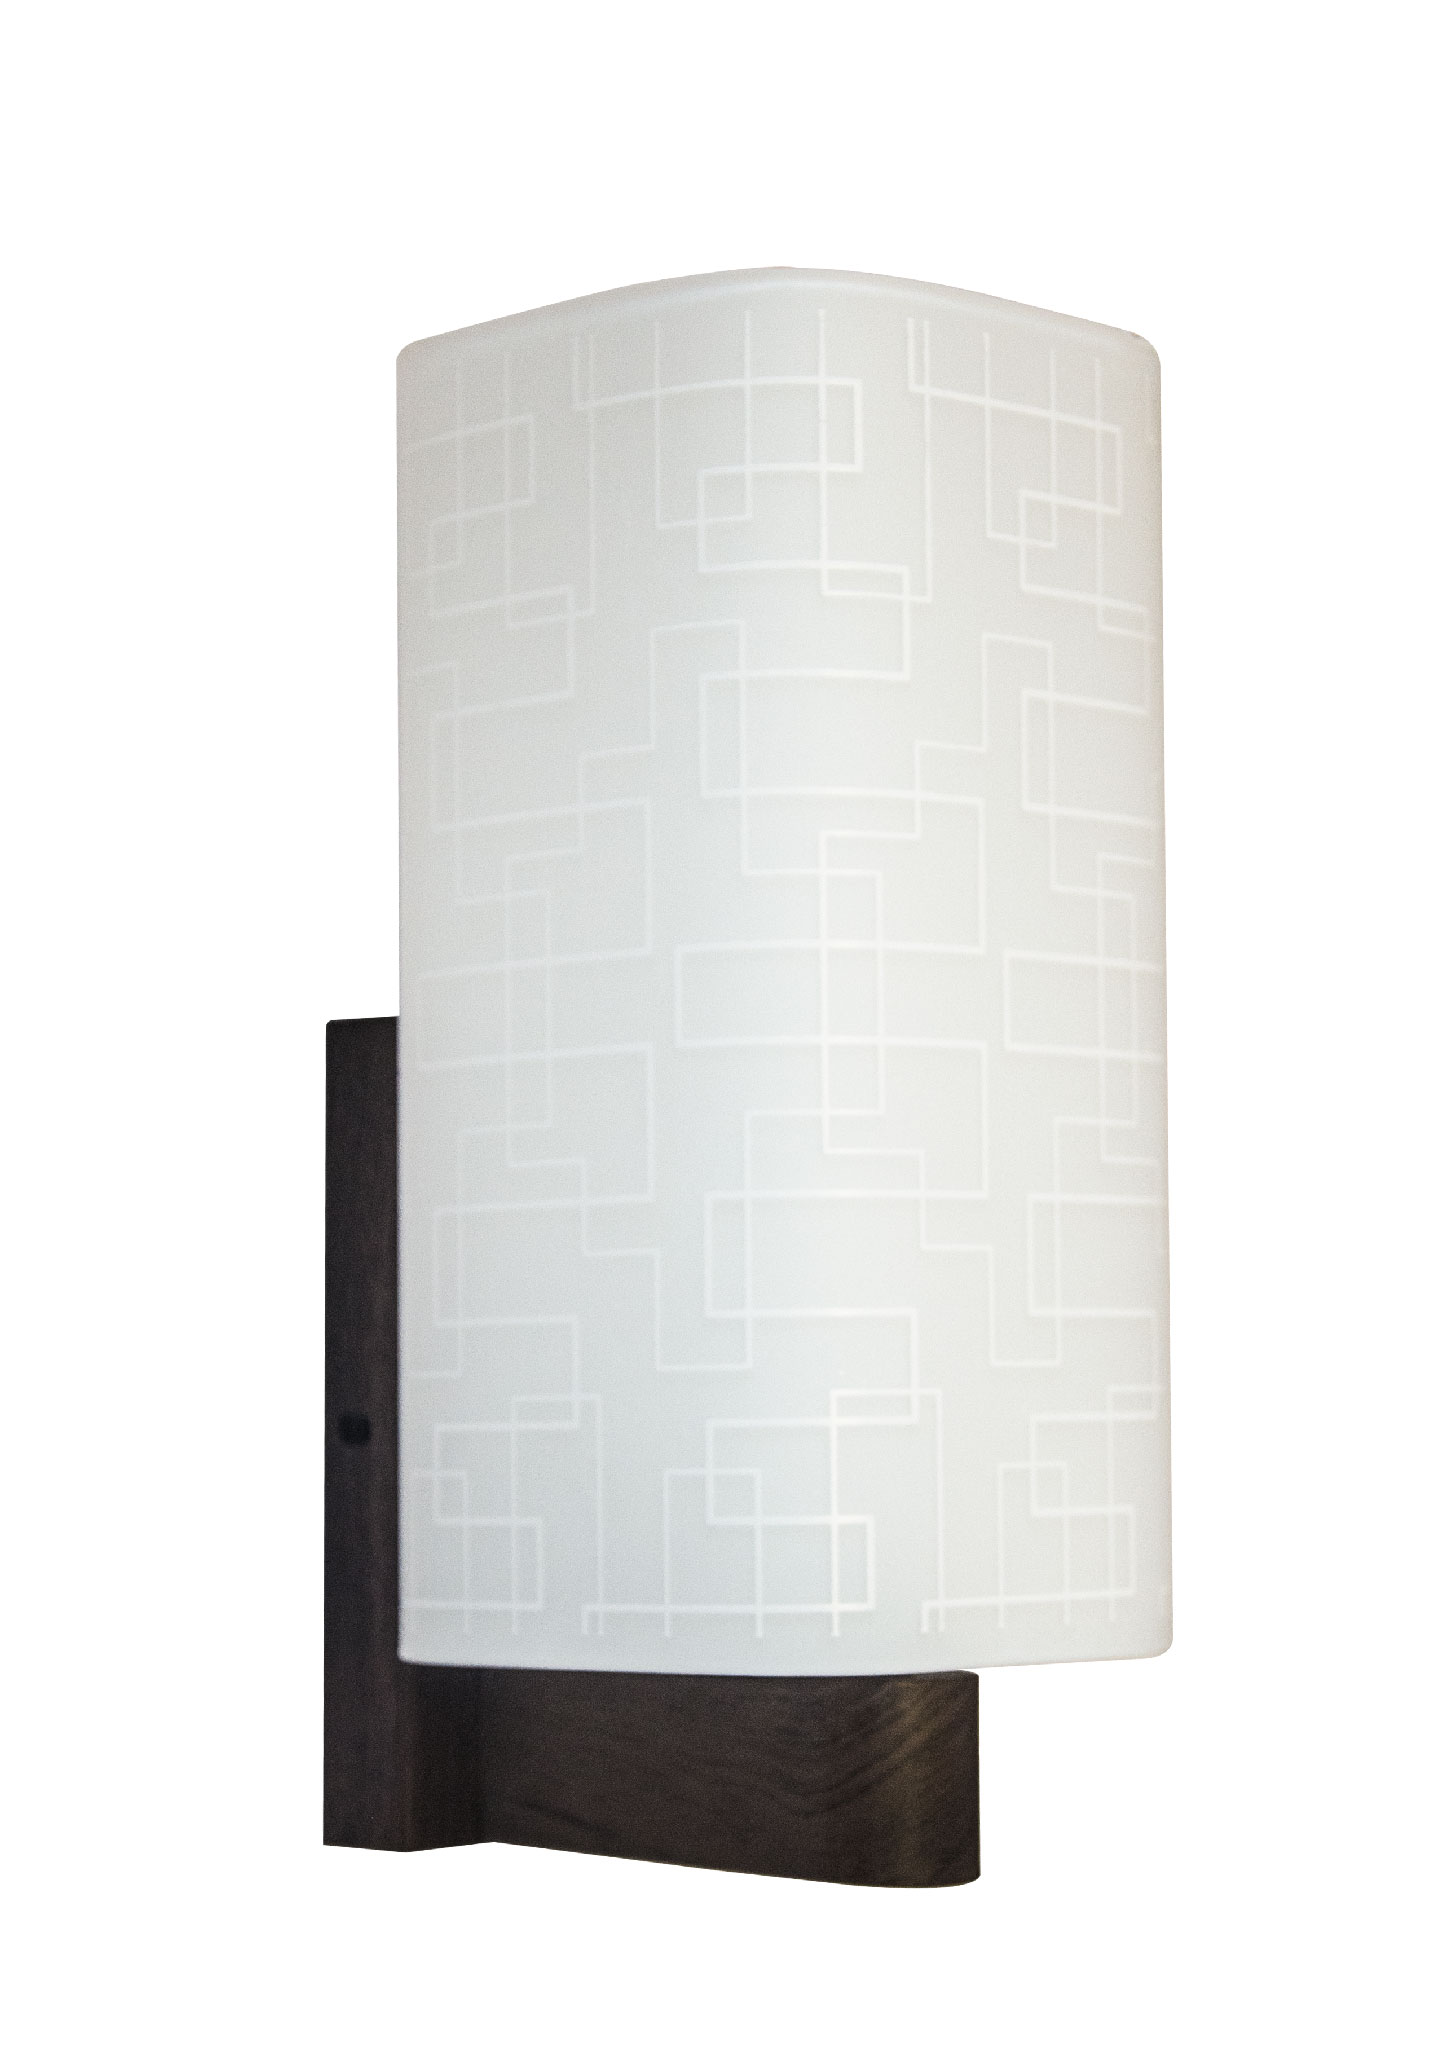 Indoor wall light Bella GBG 1 ( E27 Holder ) ( Without Lamp )